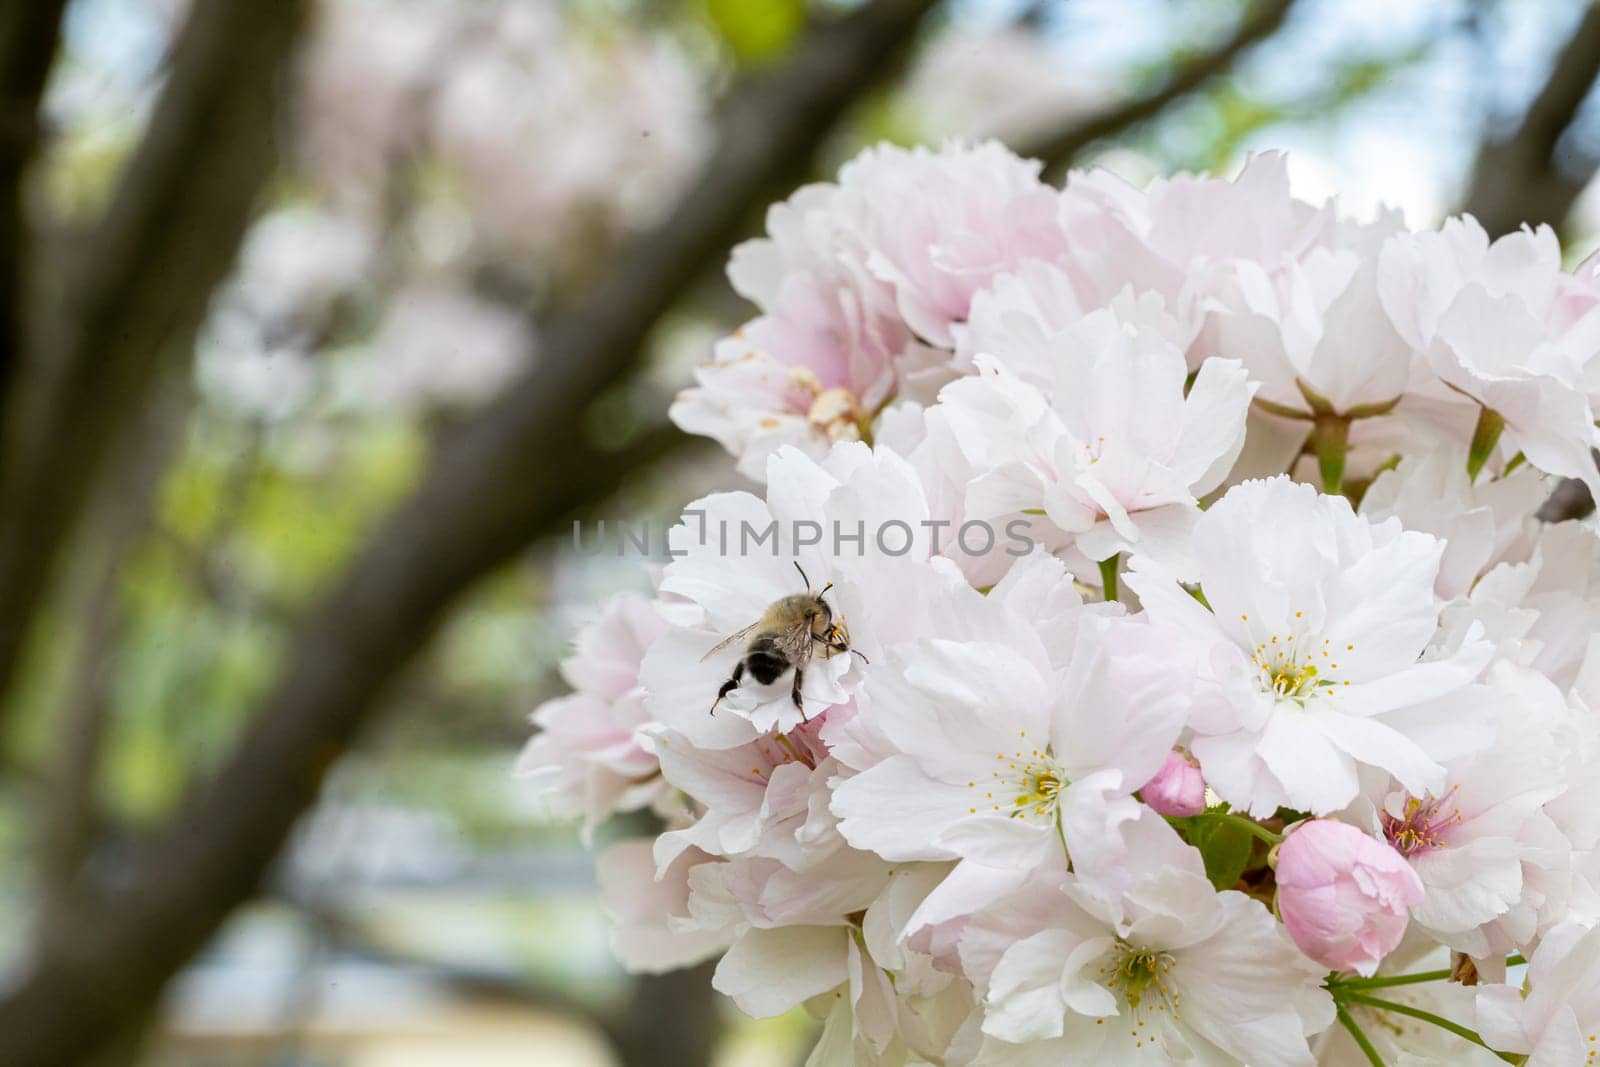 A spring scene depicting how a bee dines on nectar from an apple blossom of paradise and pollinates it at the same time.